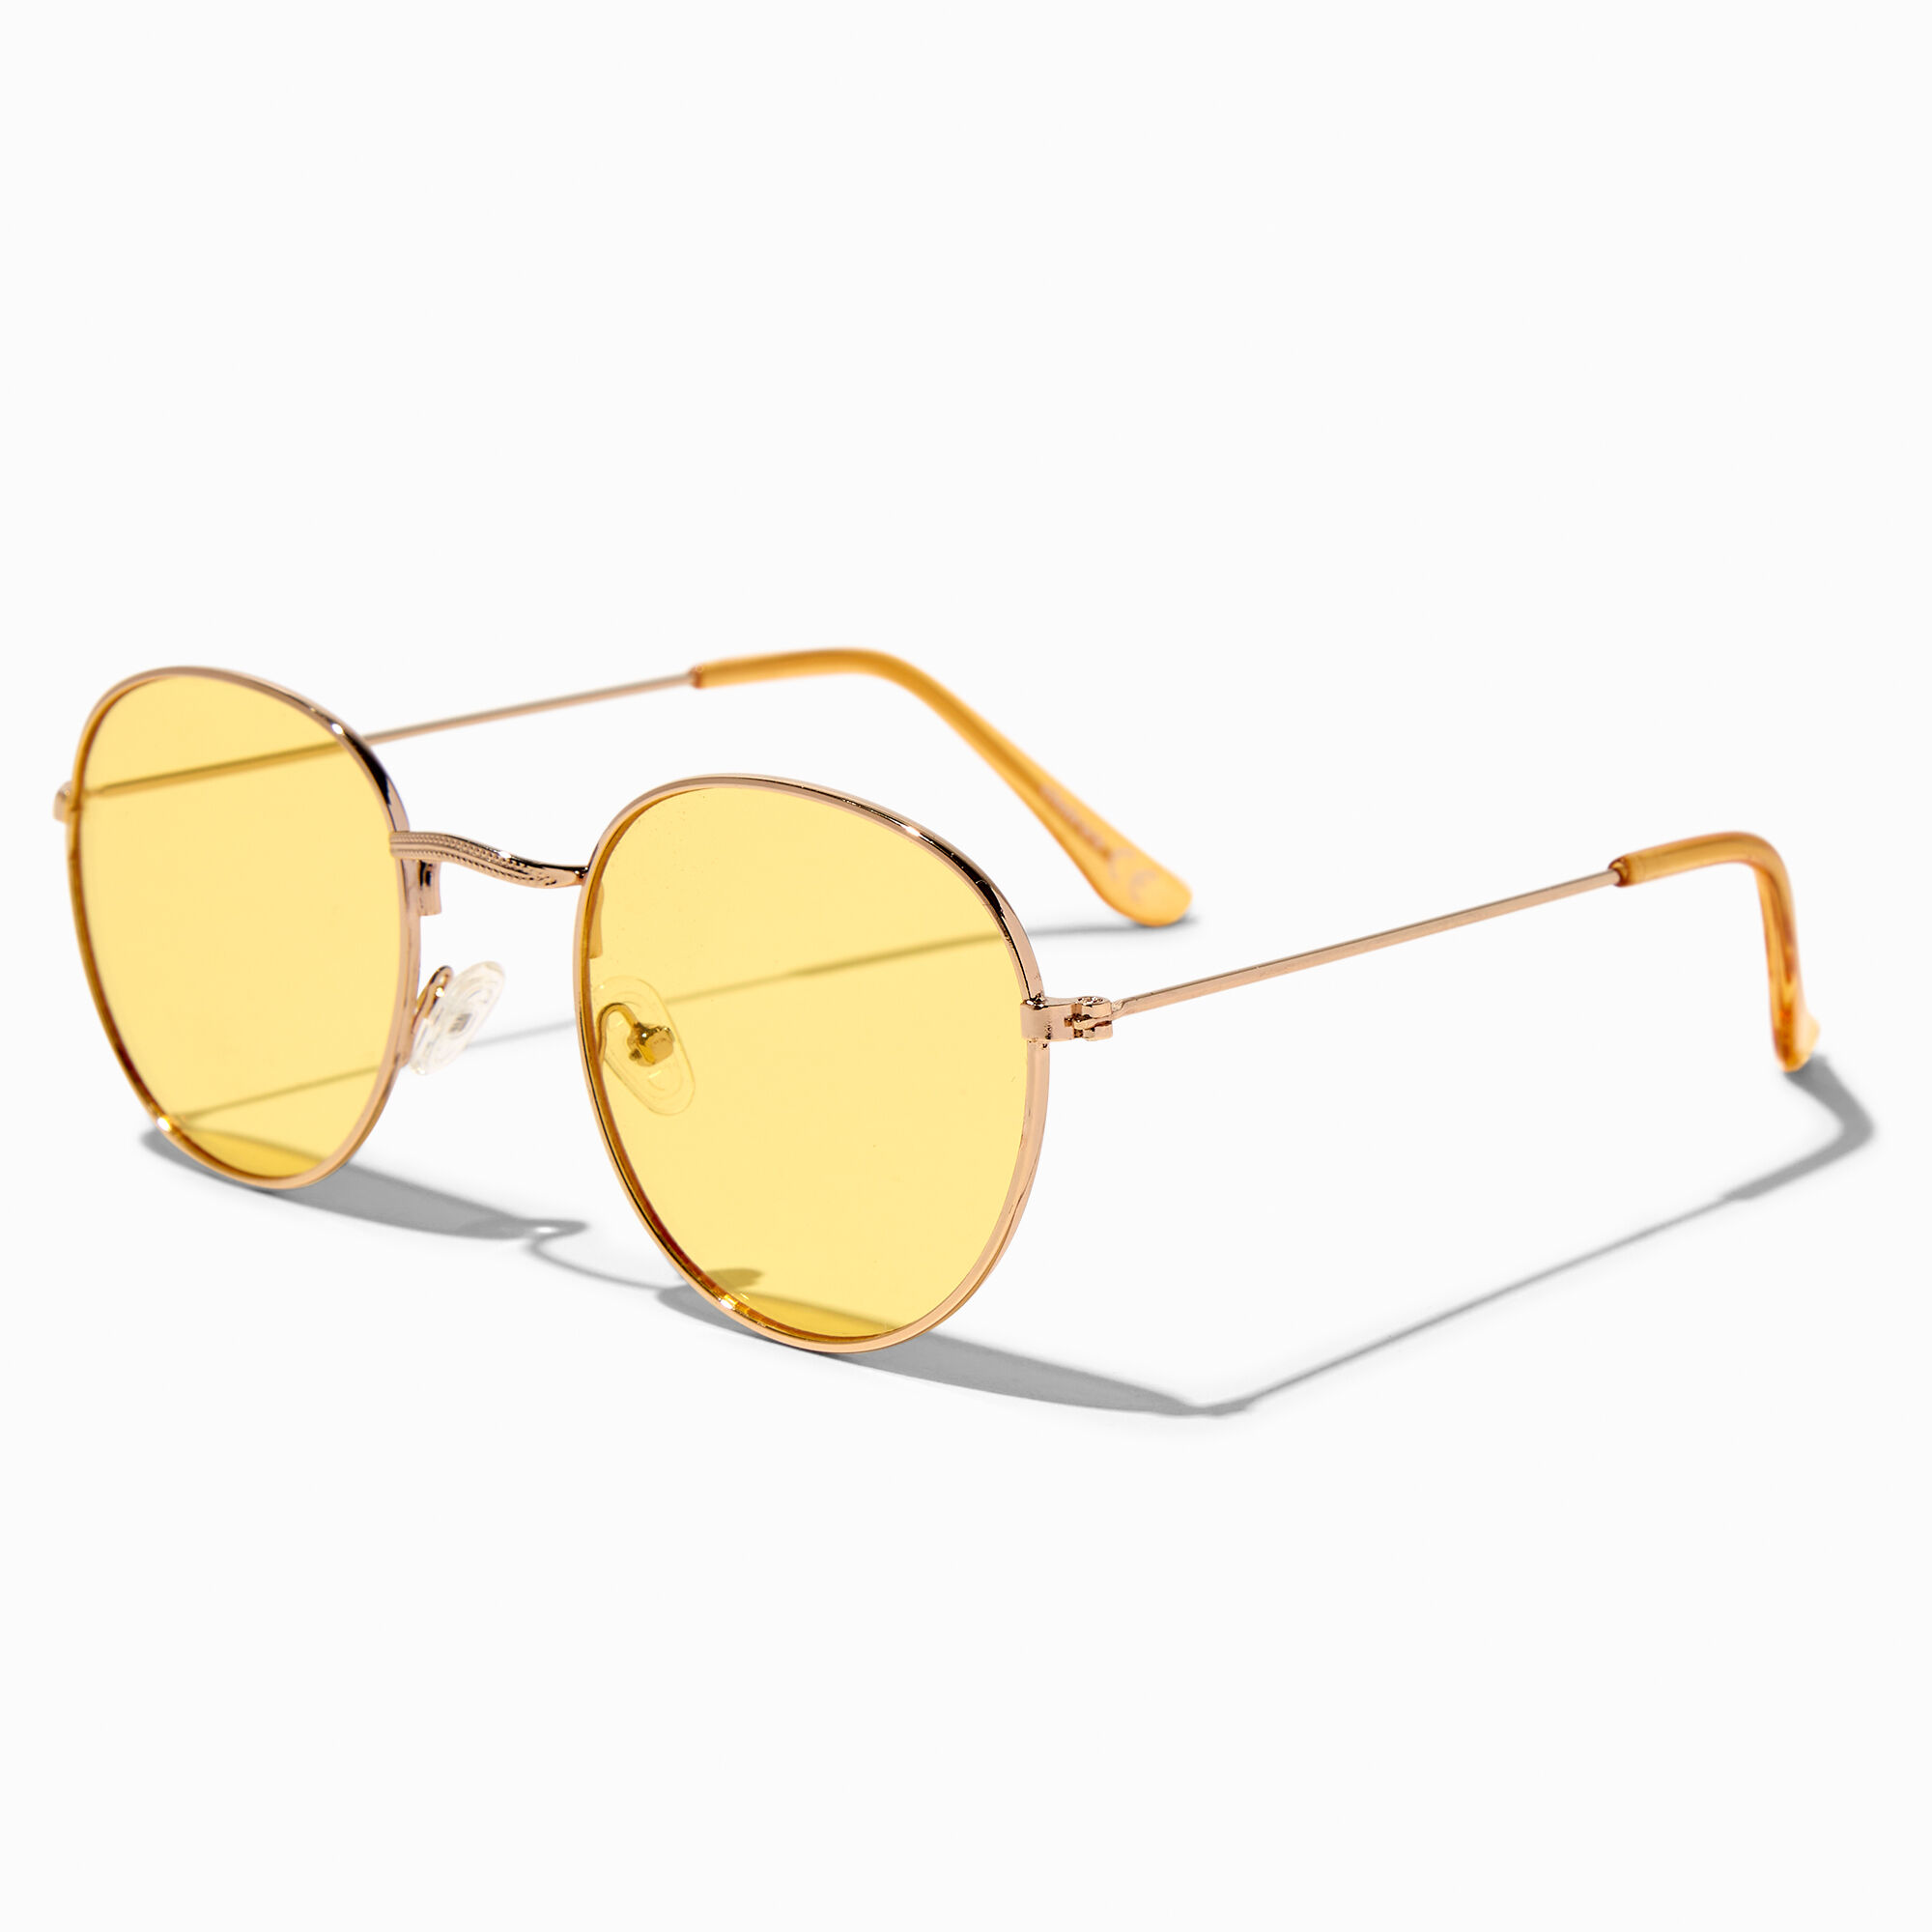 View Claires Gold Round Sunglasses Yellow information